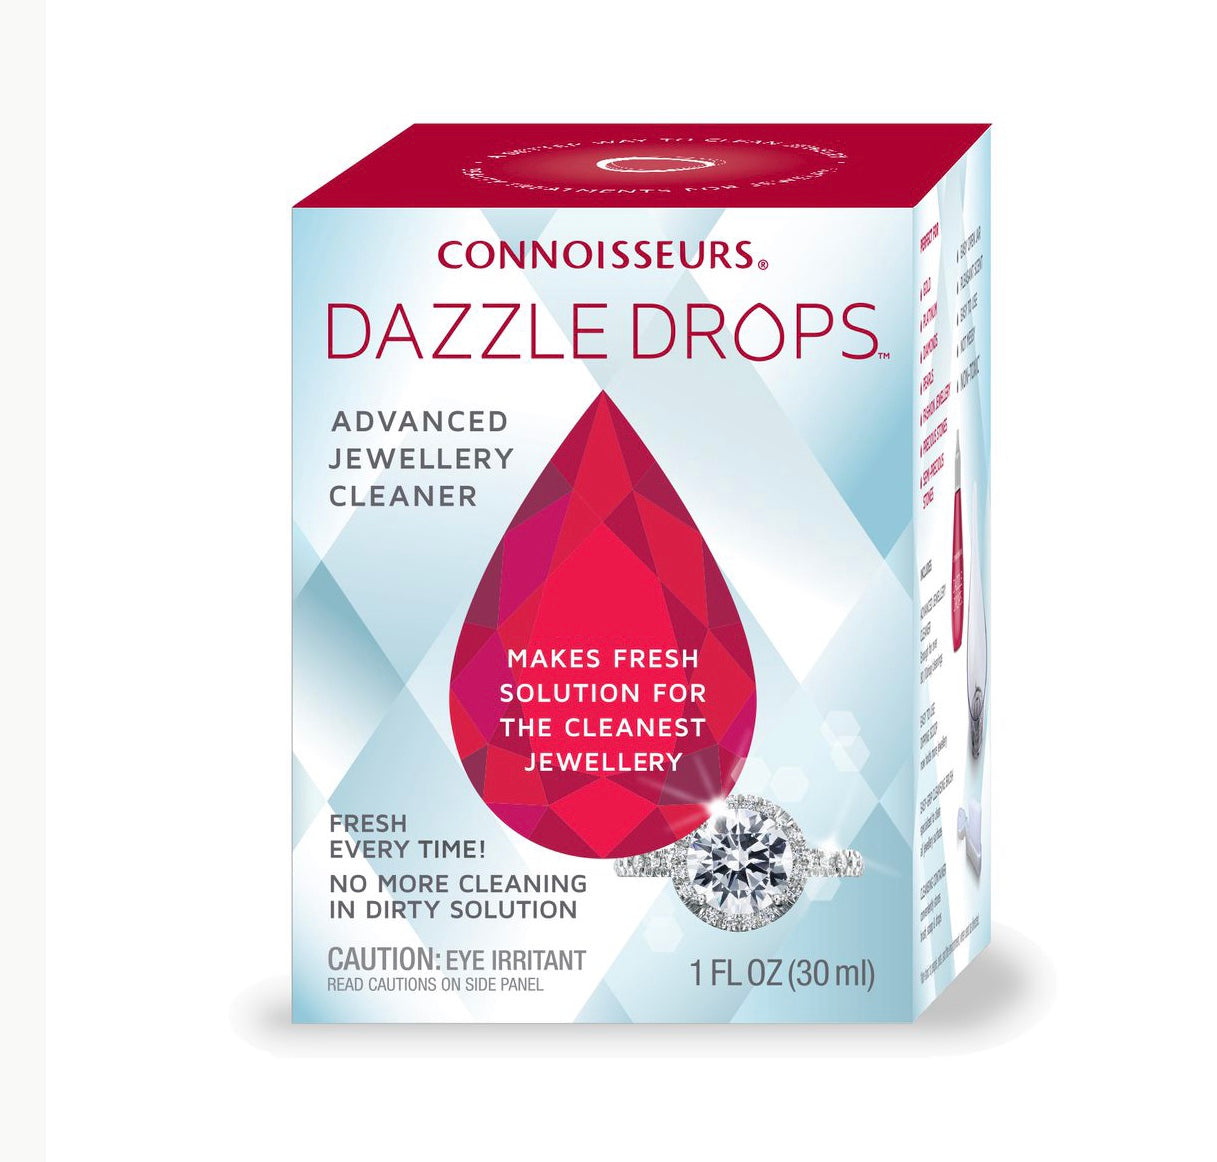 Connoisseurs Dazzle drops advanced jewellery cleaner 30ml